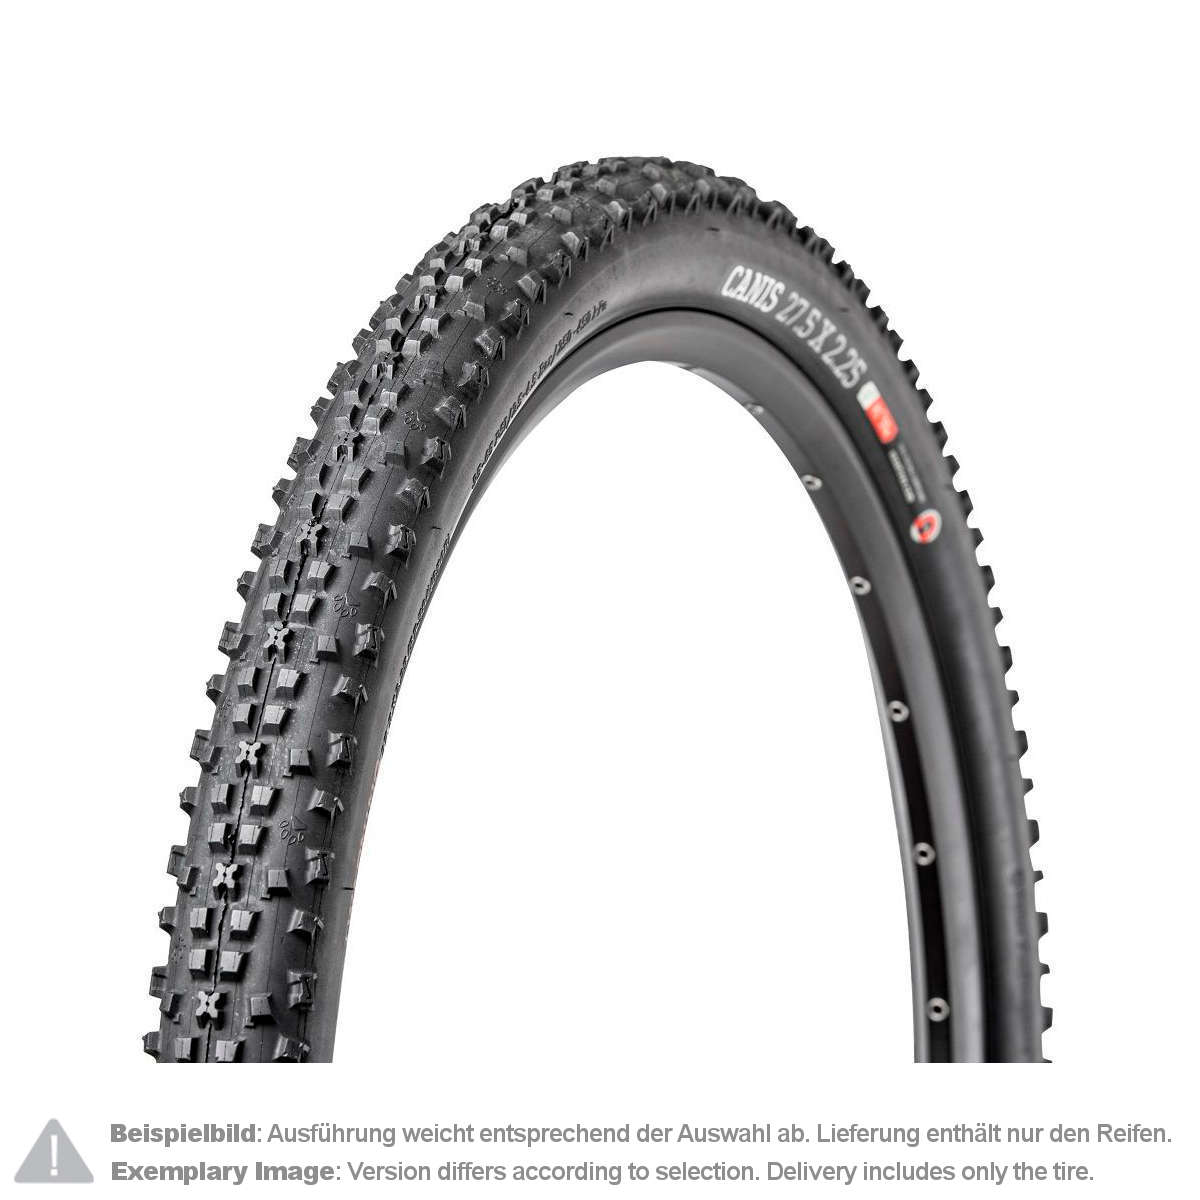 Onza MTB Tire Canis Black, 27.5 x 2.25 Inch, Tubeless Ready, 120 TPI, C3, 65a/55a, Foldable